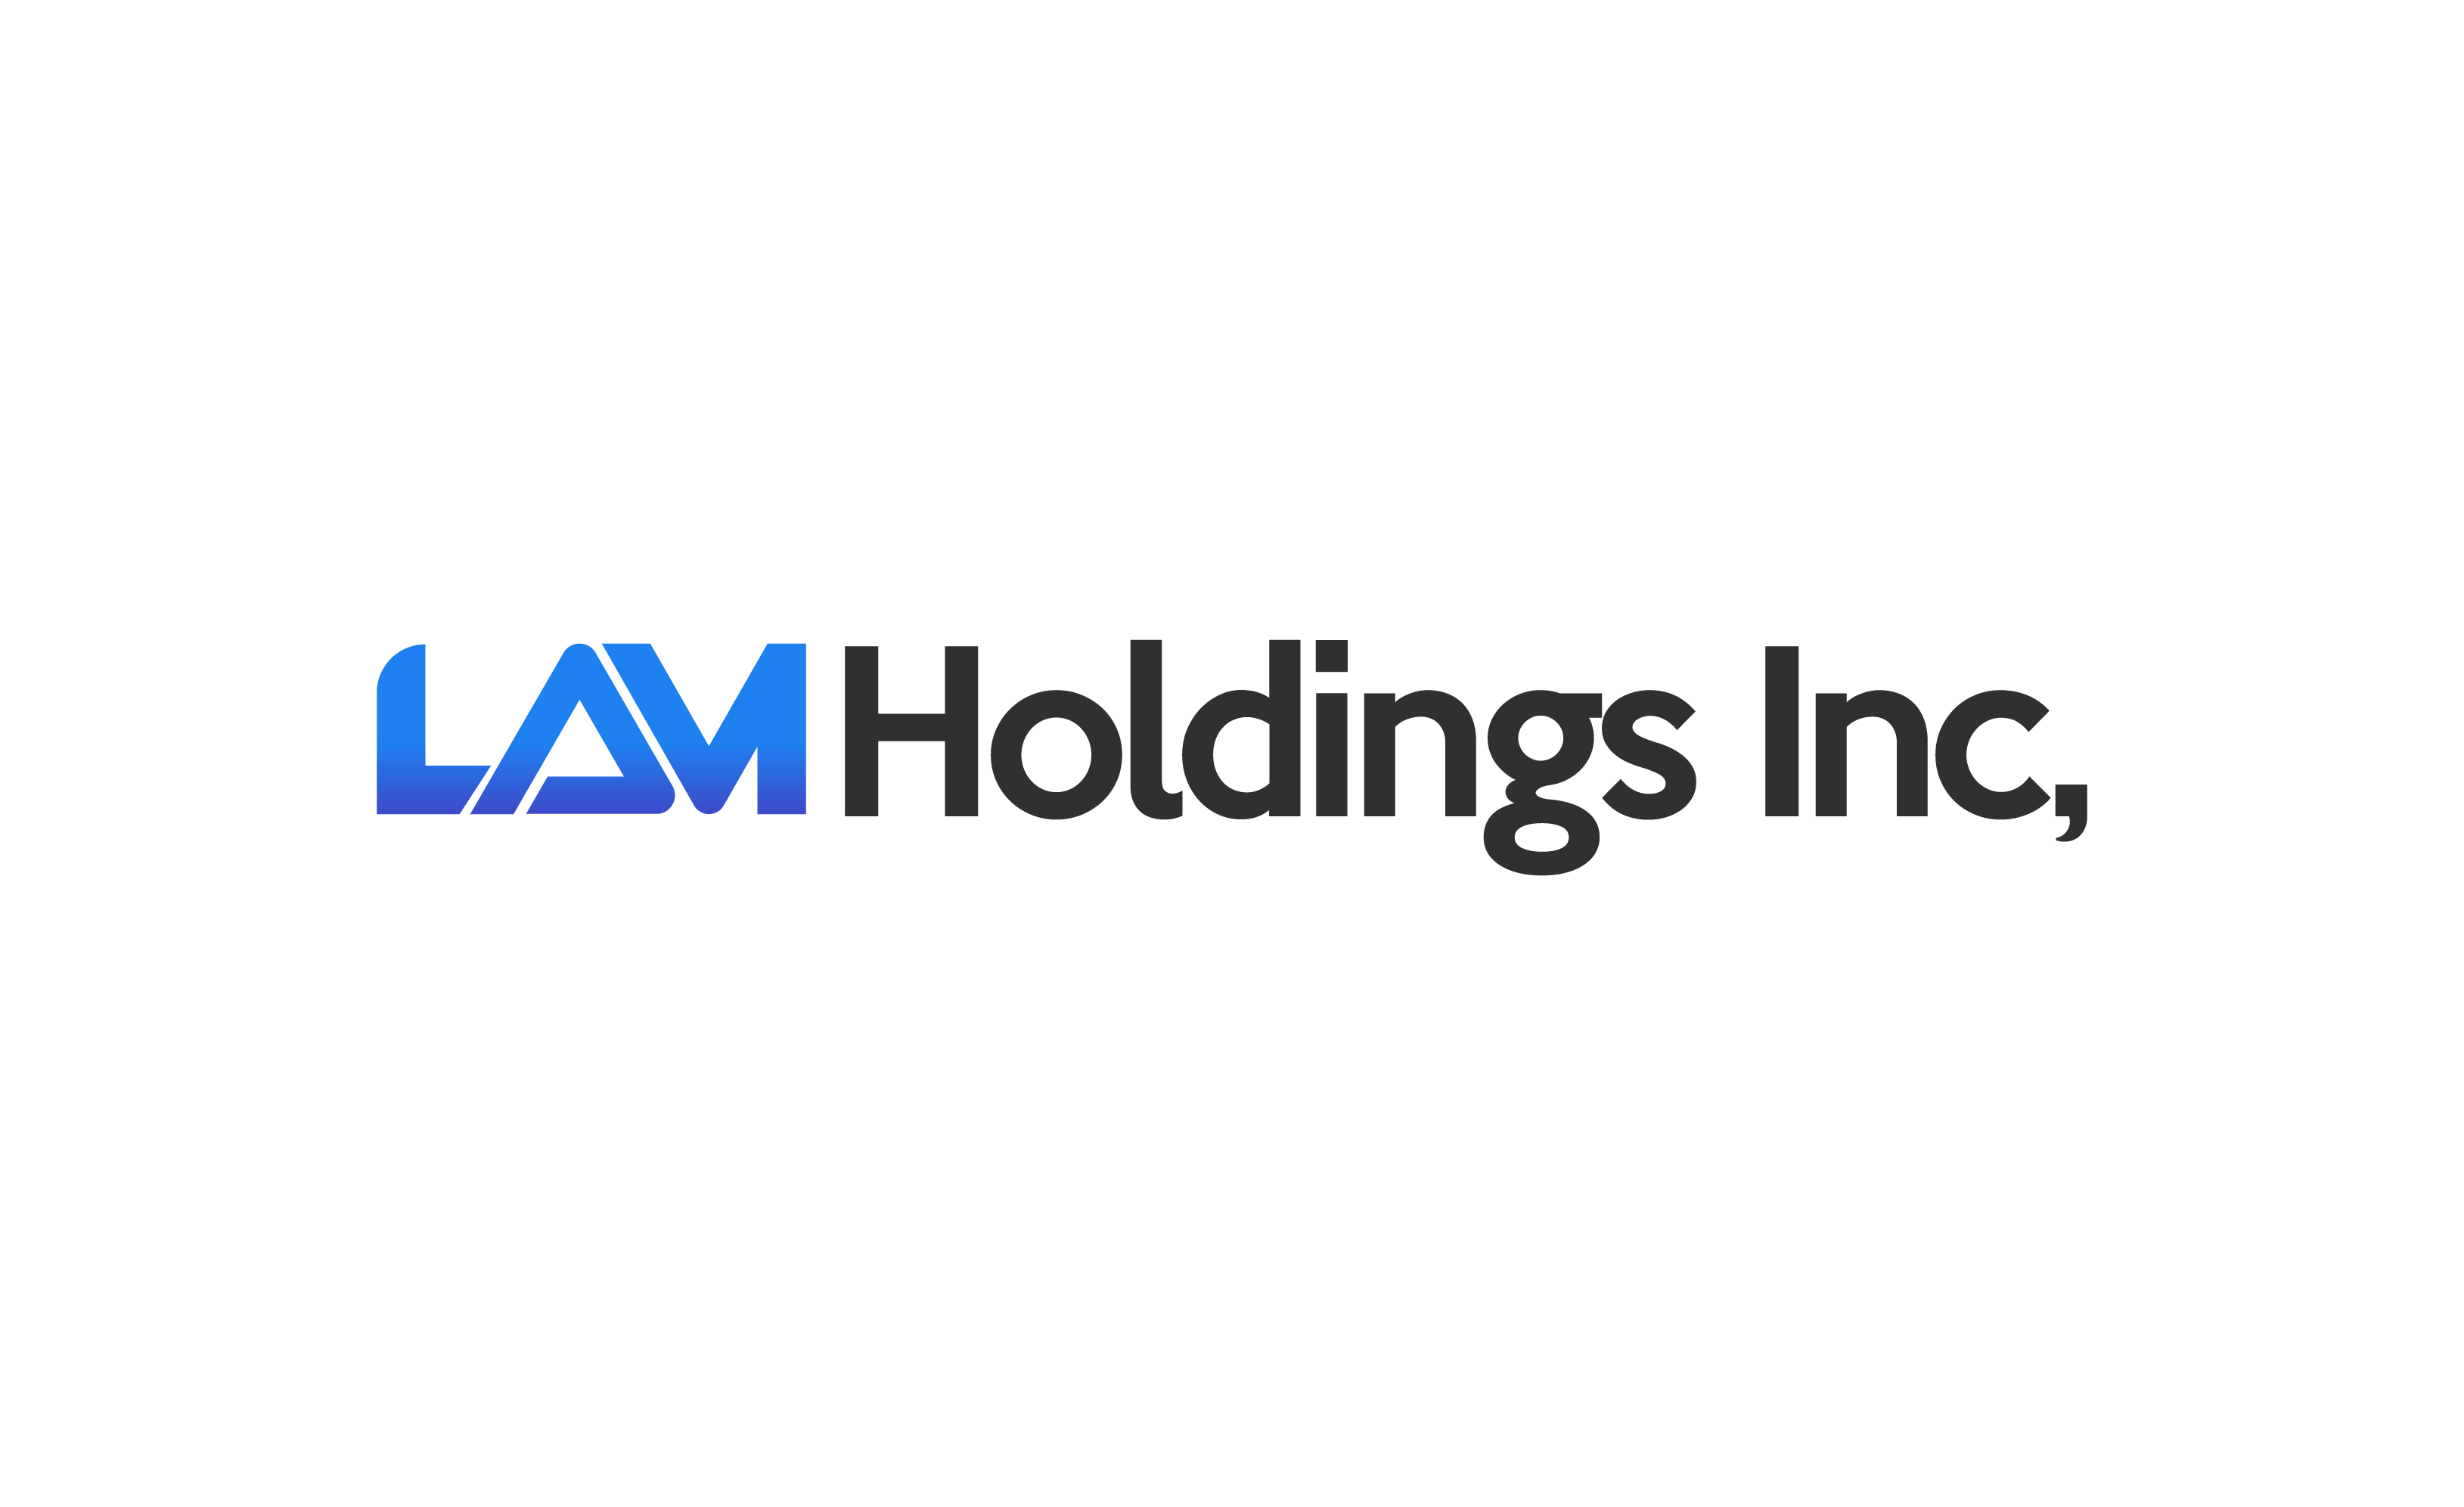 LAM Holding, Inc. today announced that its European operation has introduced multi-currency capabilities as part of the company's comprehensive suite of services for its white label clients.